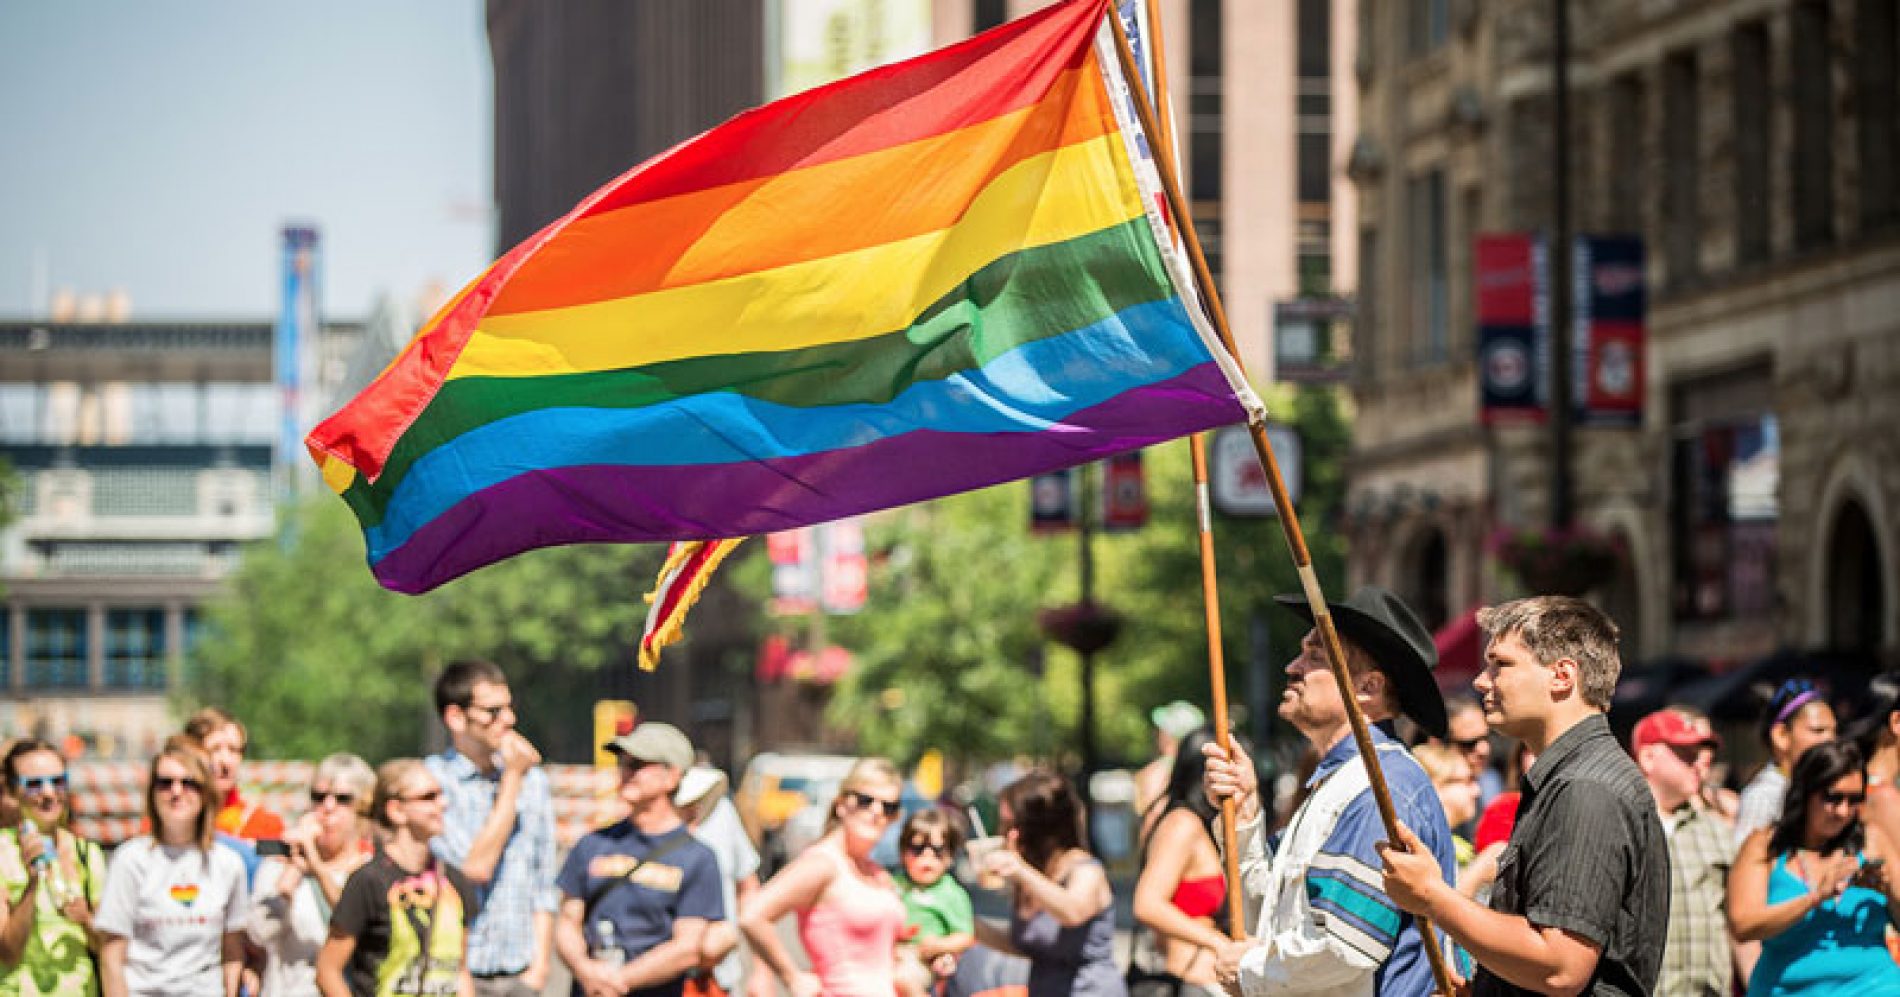 The Piece About The Connection Between Strong Economies and LGBT Rights